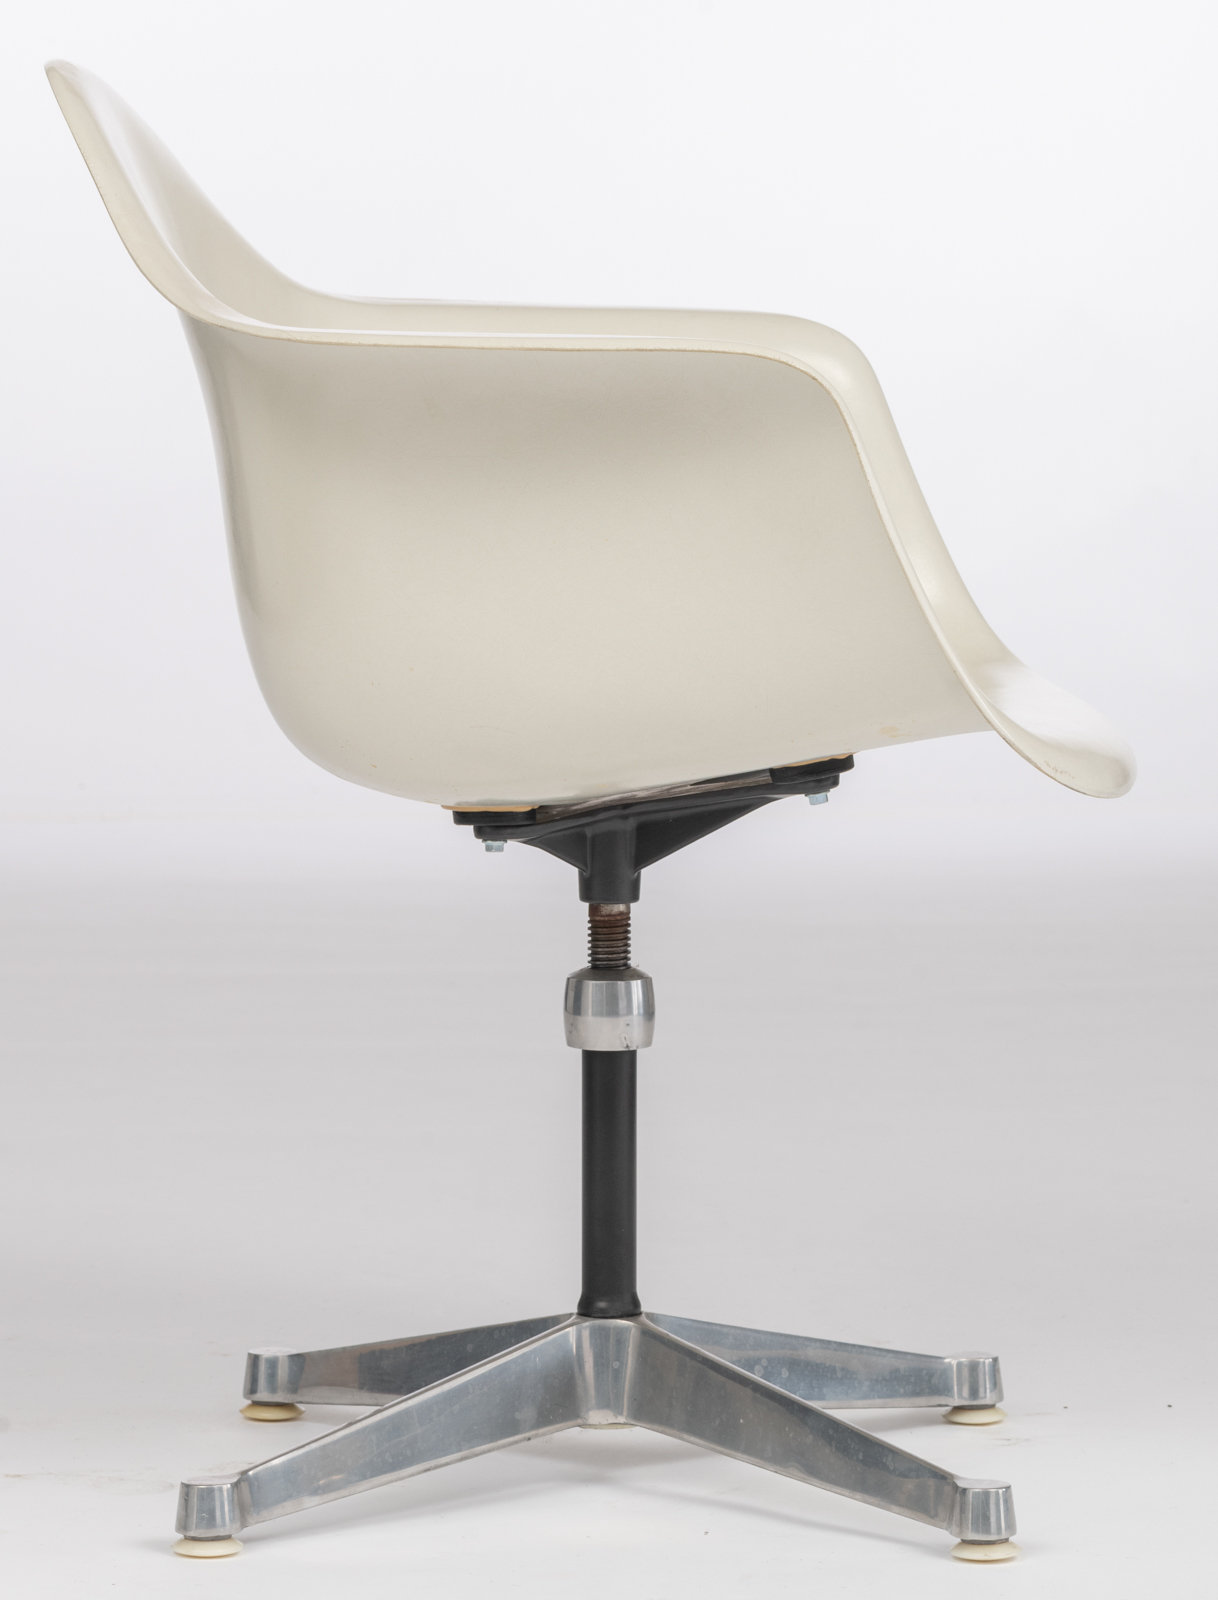 A white fibreglass shell 'PAC' armchair, design by Eames for Herman Miller, H 77,5 - W 63 cm - Image 4 of 10